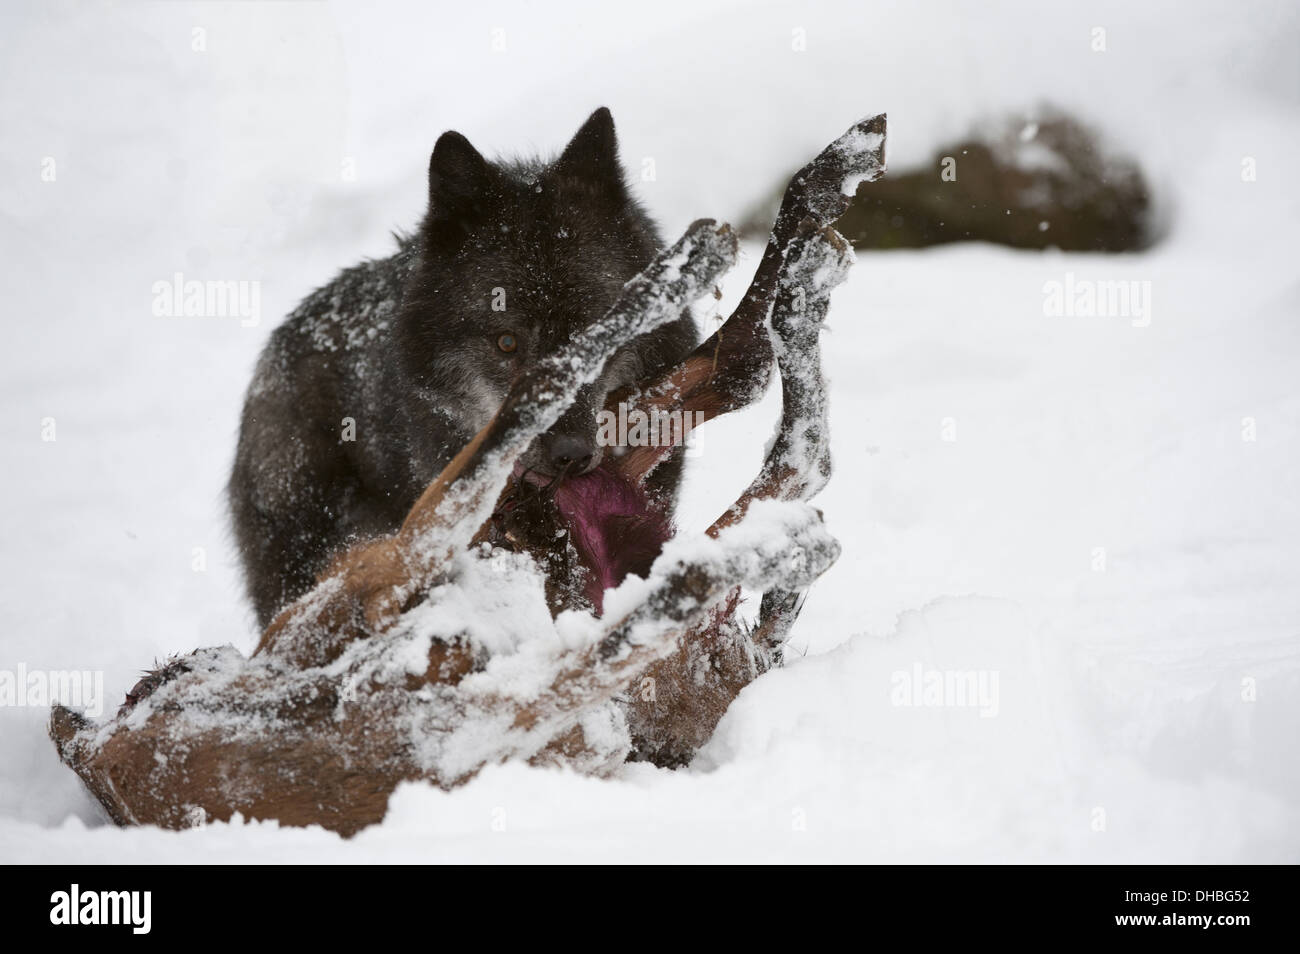 Timber wolf with carrion in snow, Canis lupus lycaon, North America Stock Photo